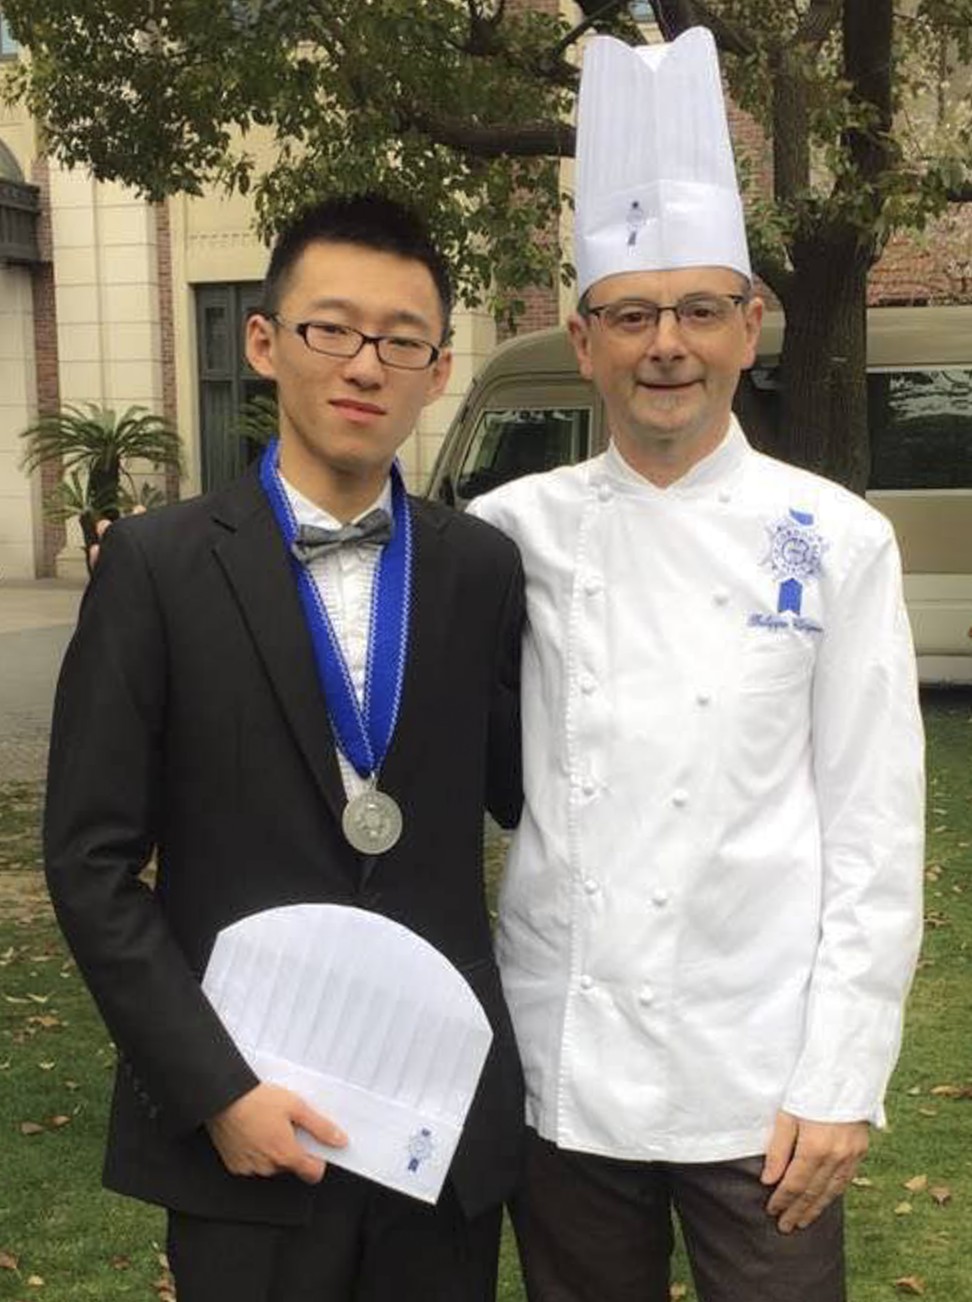 Luo (left) with one of his instructors at his graduation ceremony.